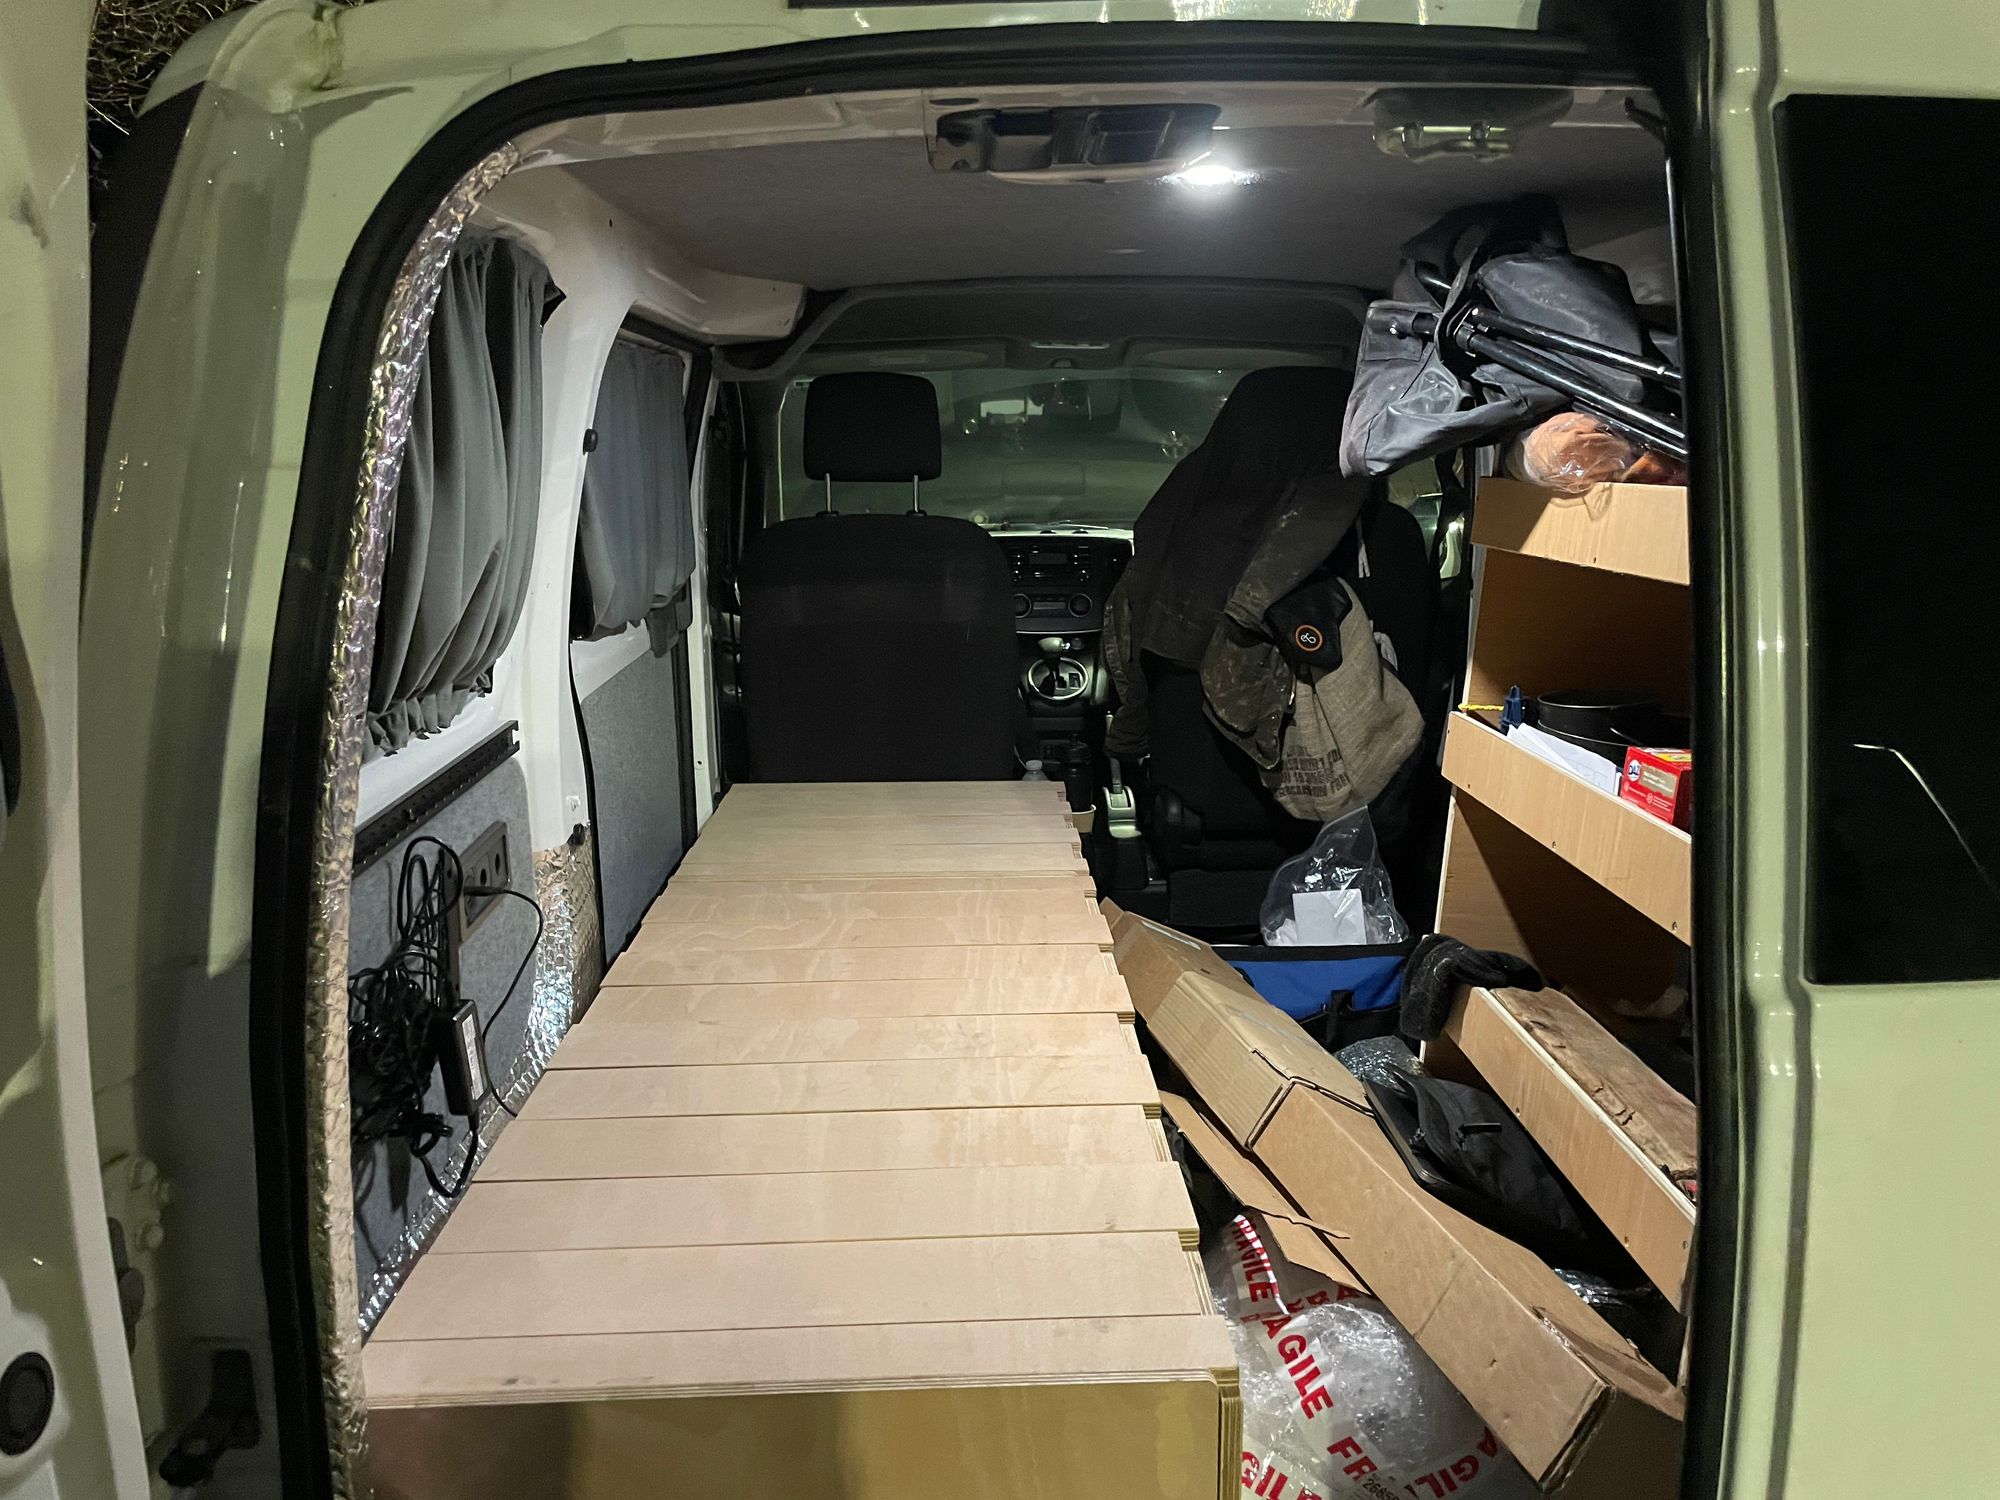 My Electric Campervan: The Struggle Bus